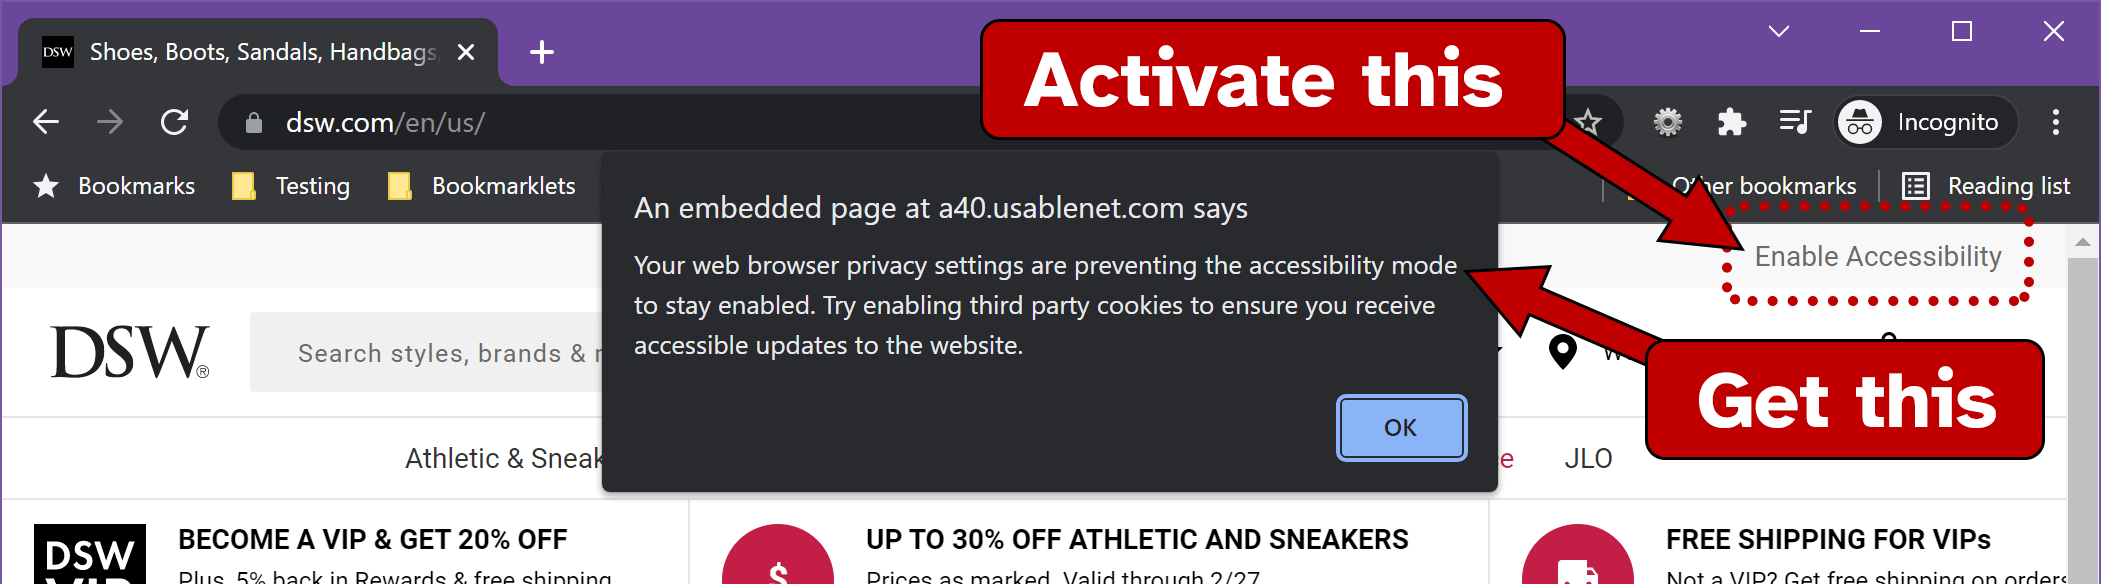 Browser alert: An embedded page at a40.usablenet.com says: Your web browser privacy settings are preventing the accessibility mode to stay enabled. Try enabling third party cookies to ensure you receive accessible updates to the website.